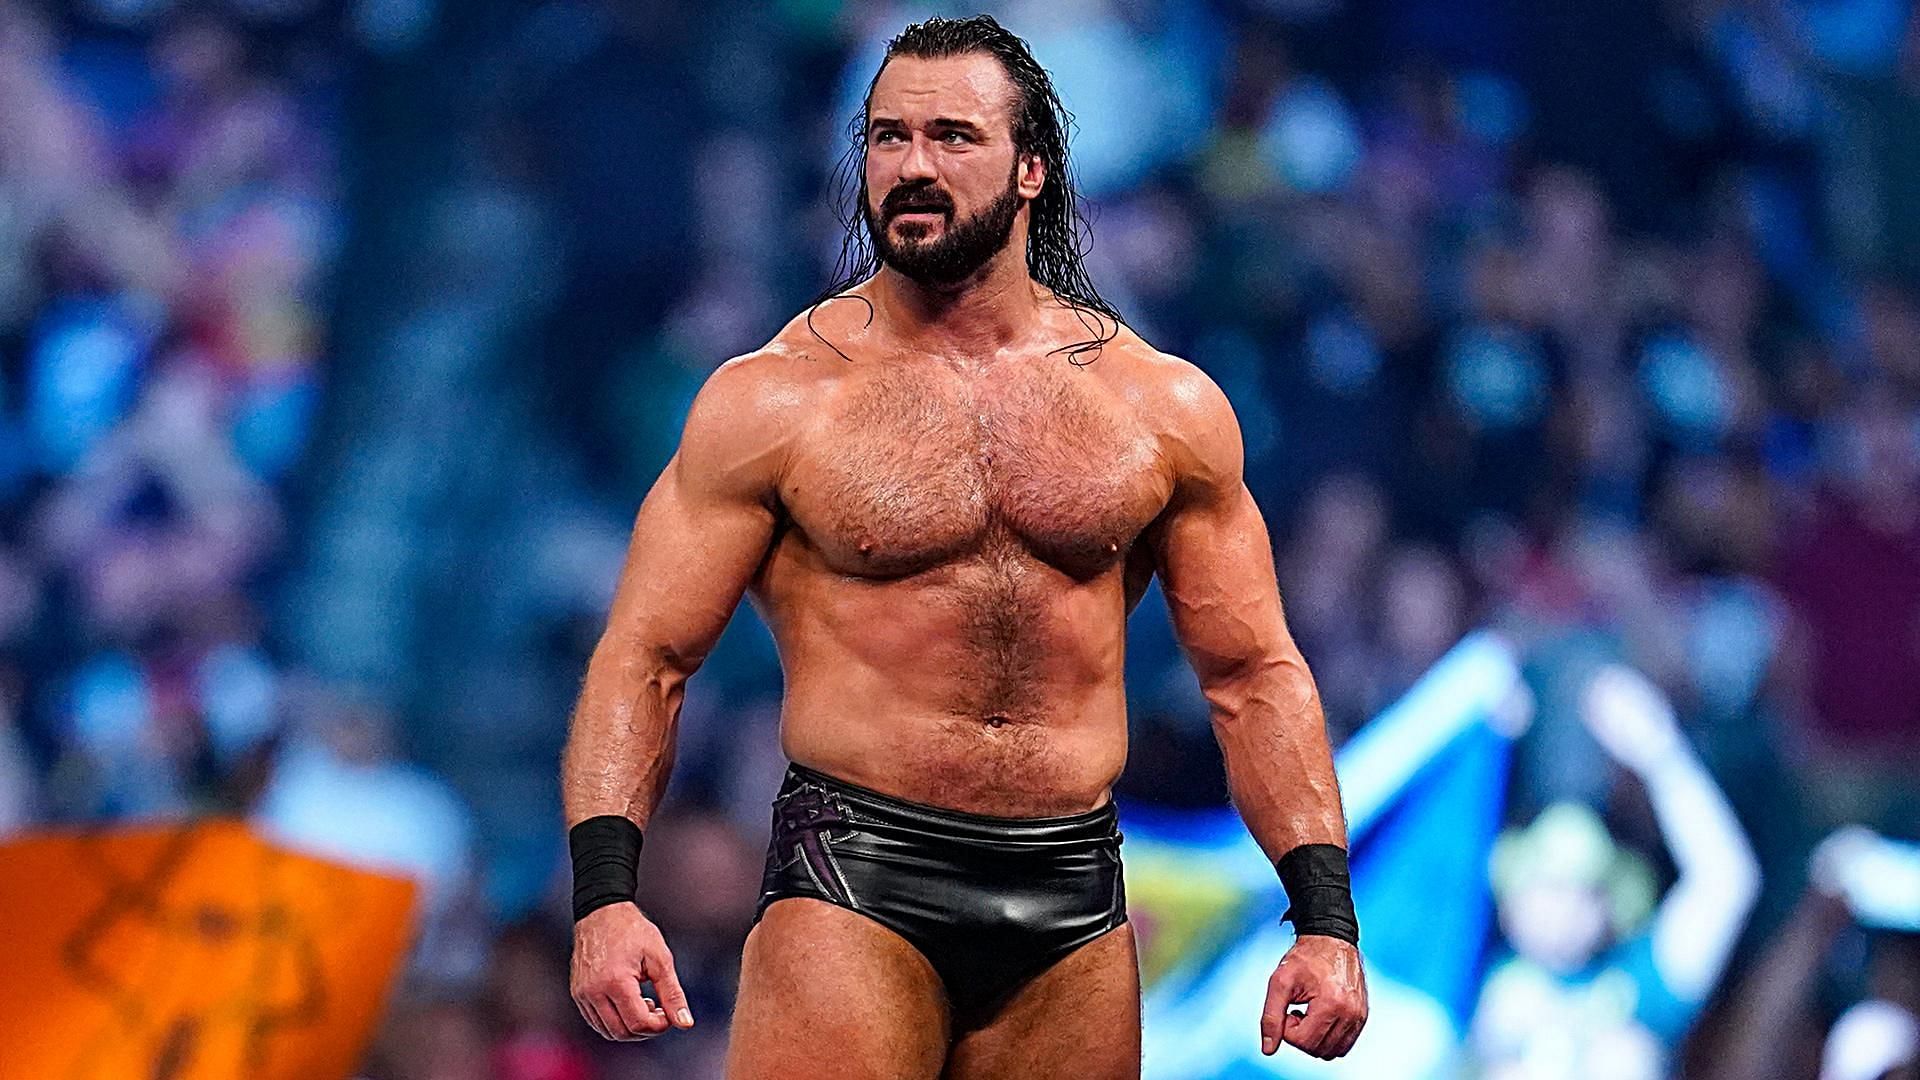 Drew McIntyre made his position clear on WWE having one unified world champion!